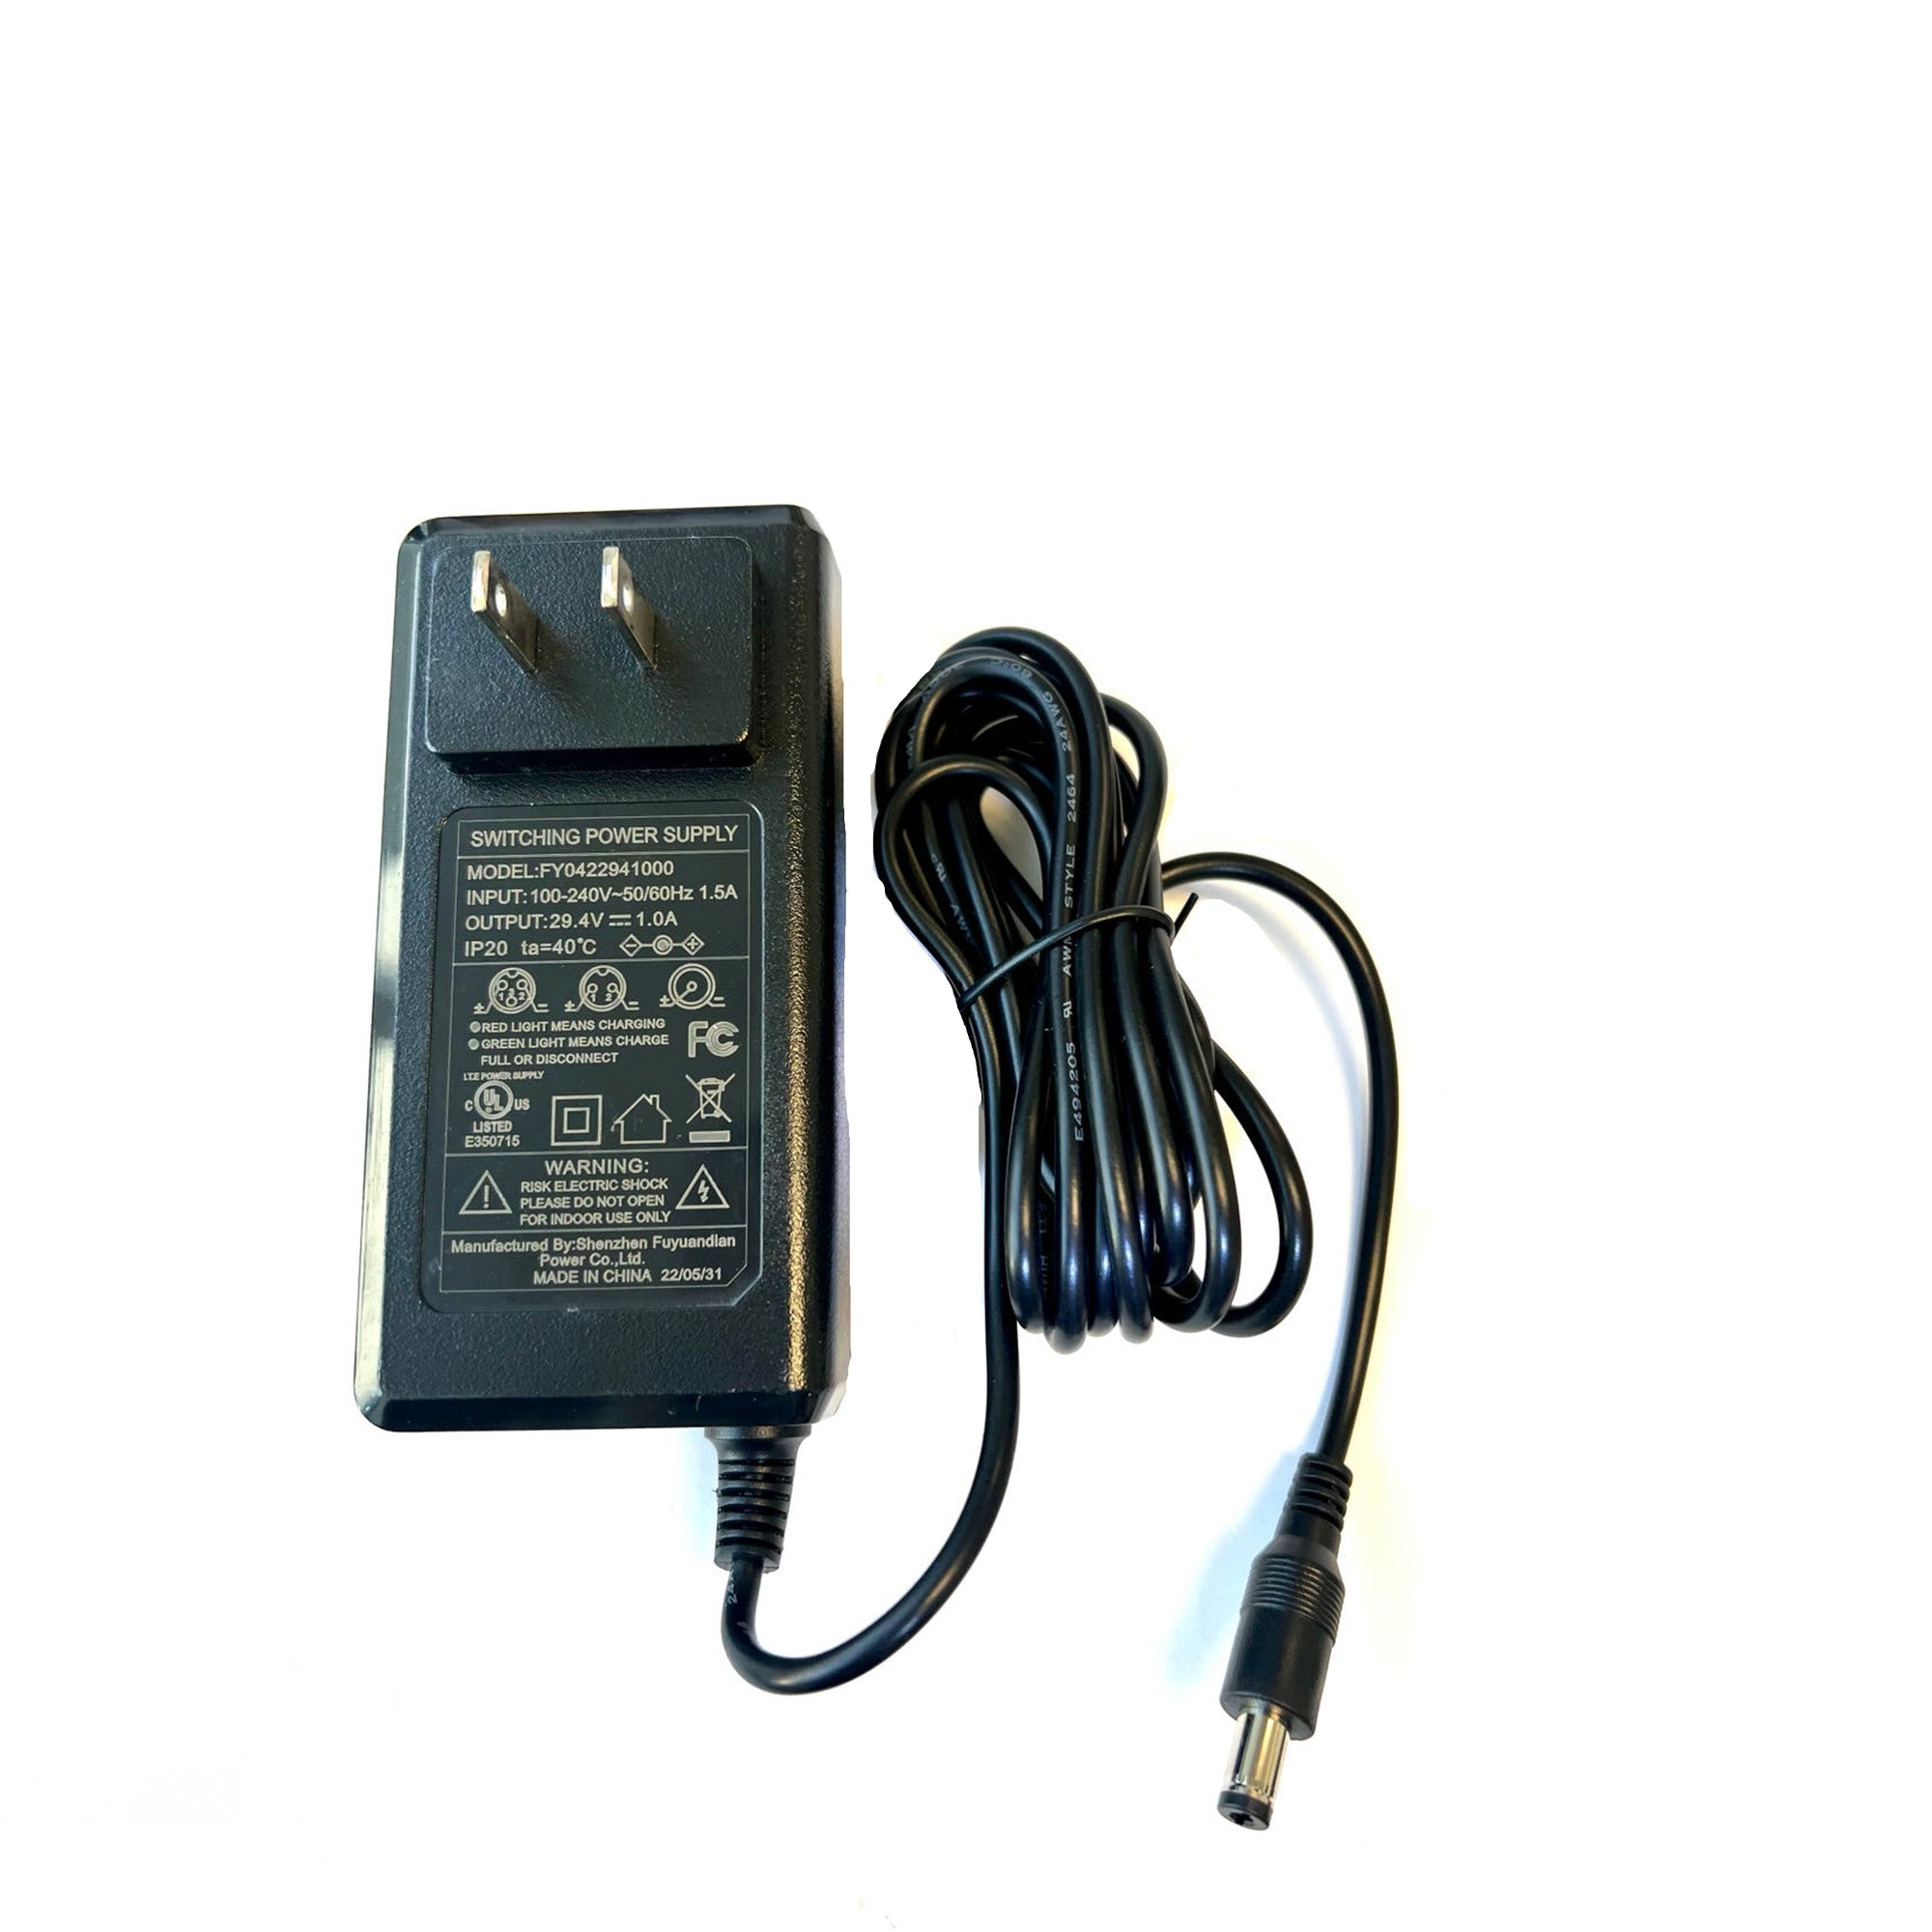 Charger For Voltaic Kids Dirt Bike